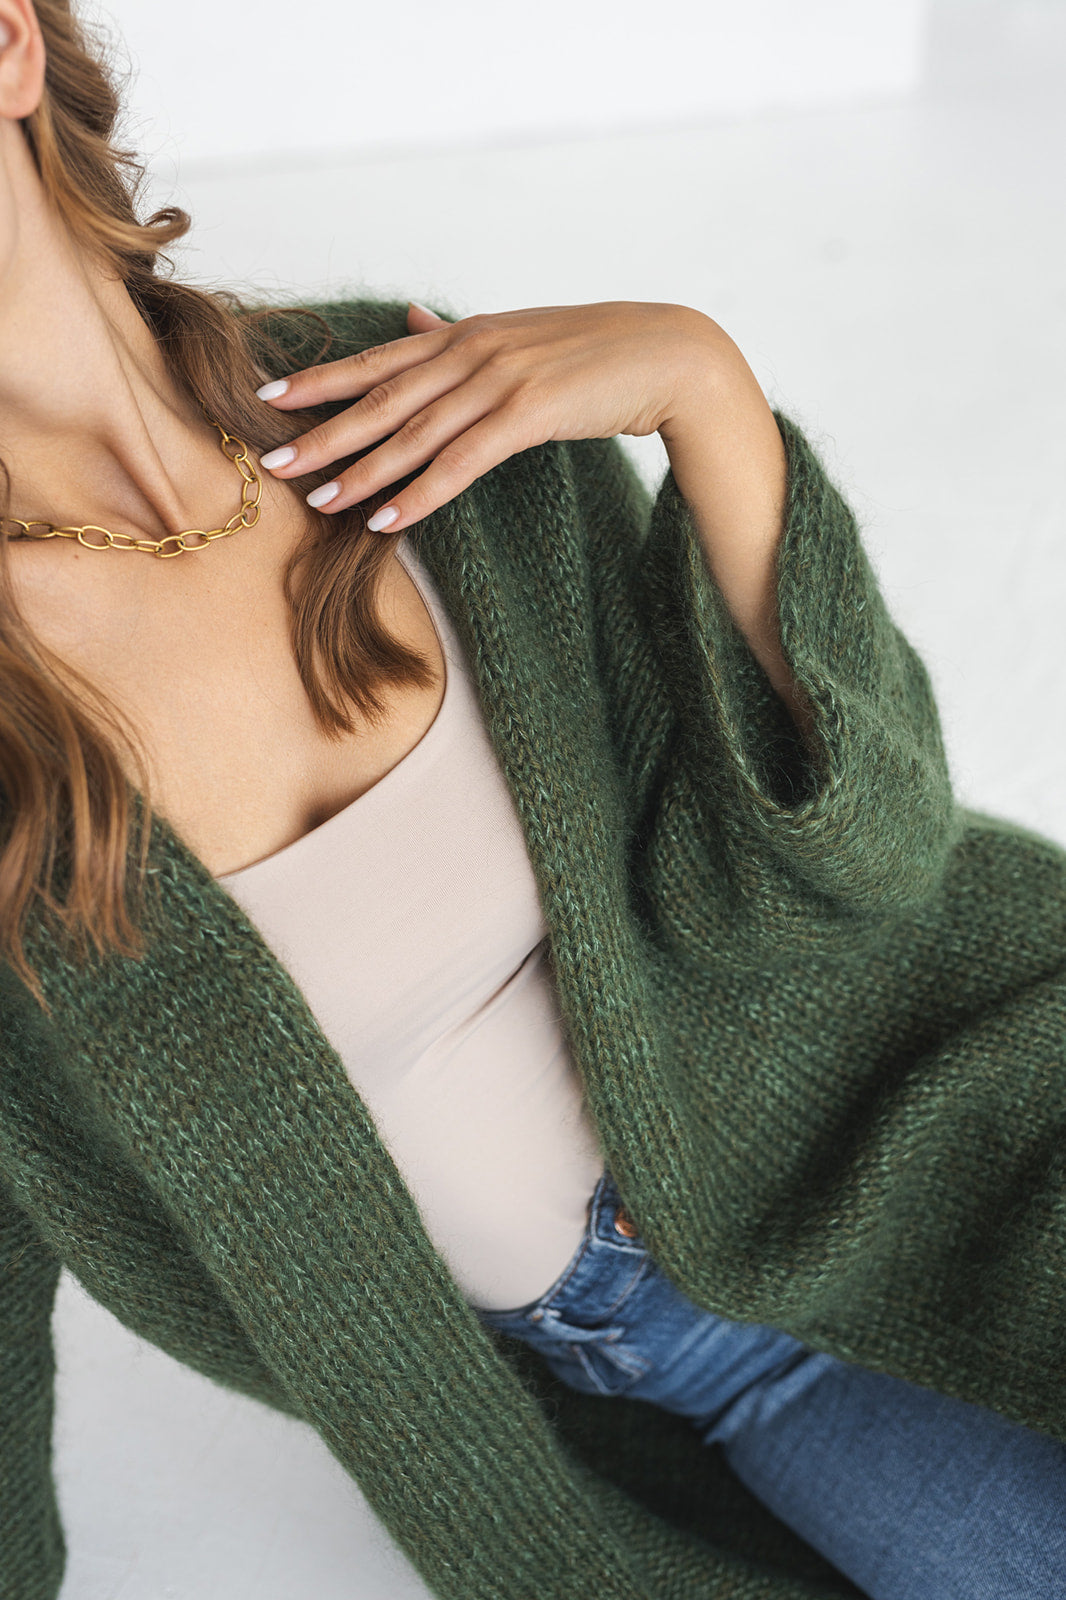 Green cable knit kimono mohair cardigan, oversized fluffy alpaca wool blend chunky knitted sweater, wide sleeves thick fuzzy jacket, gift